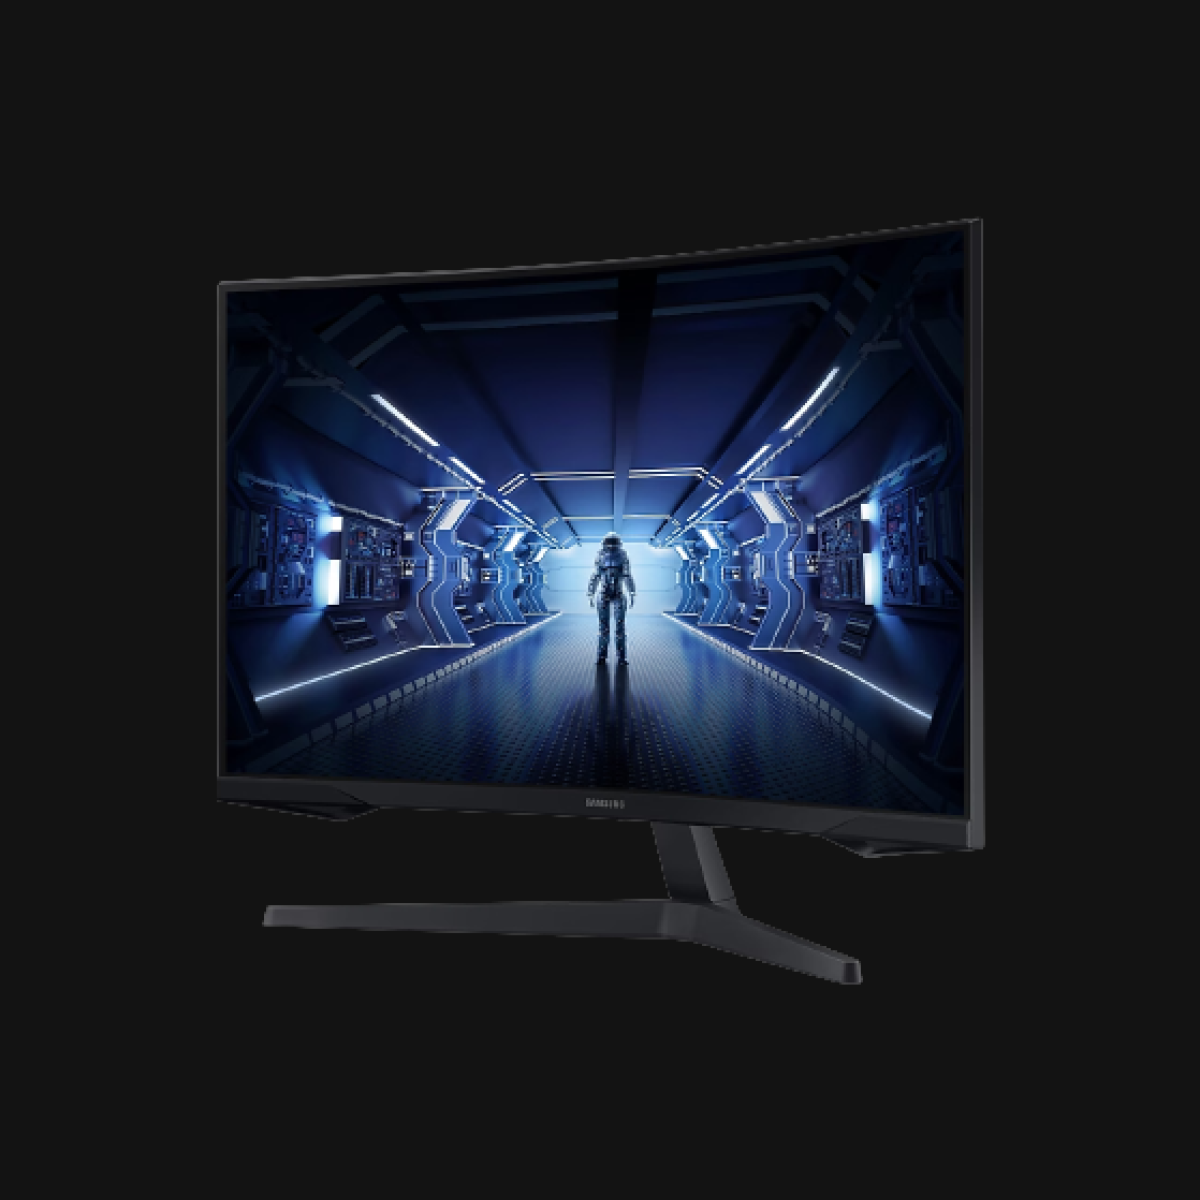 Samsung 32 G5 Odyssey Gaming Monitor With 1000R Curved Screen-2K